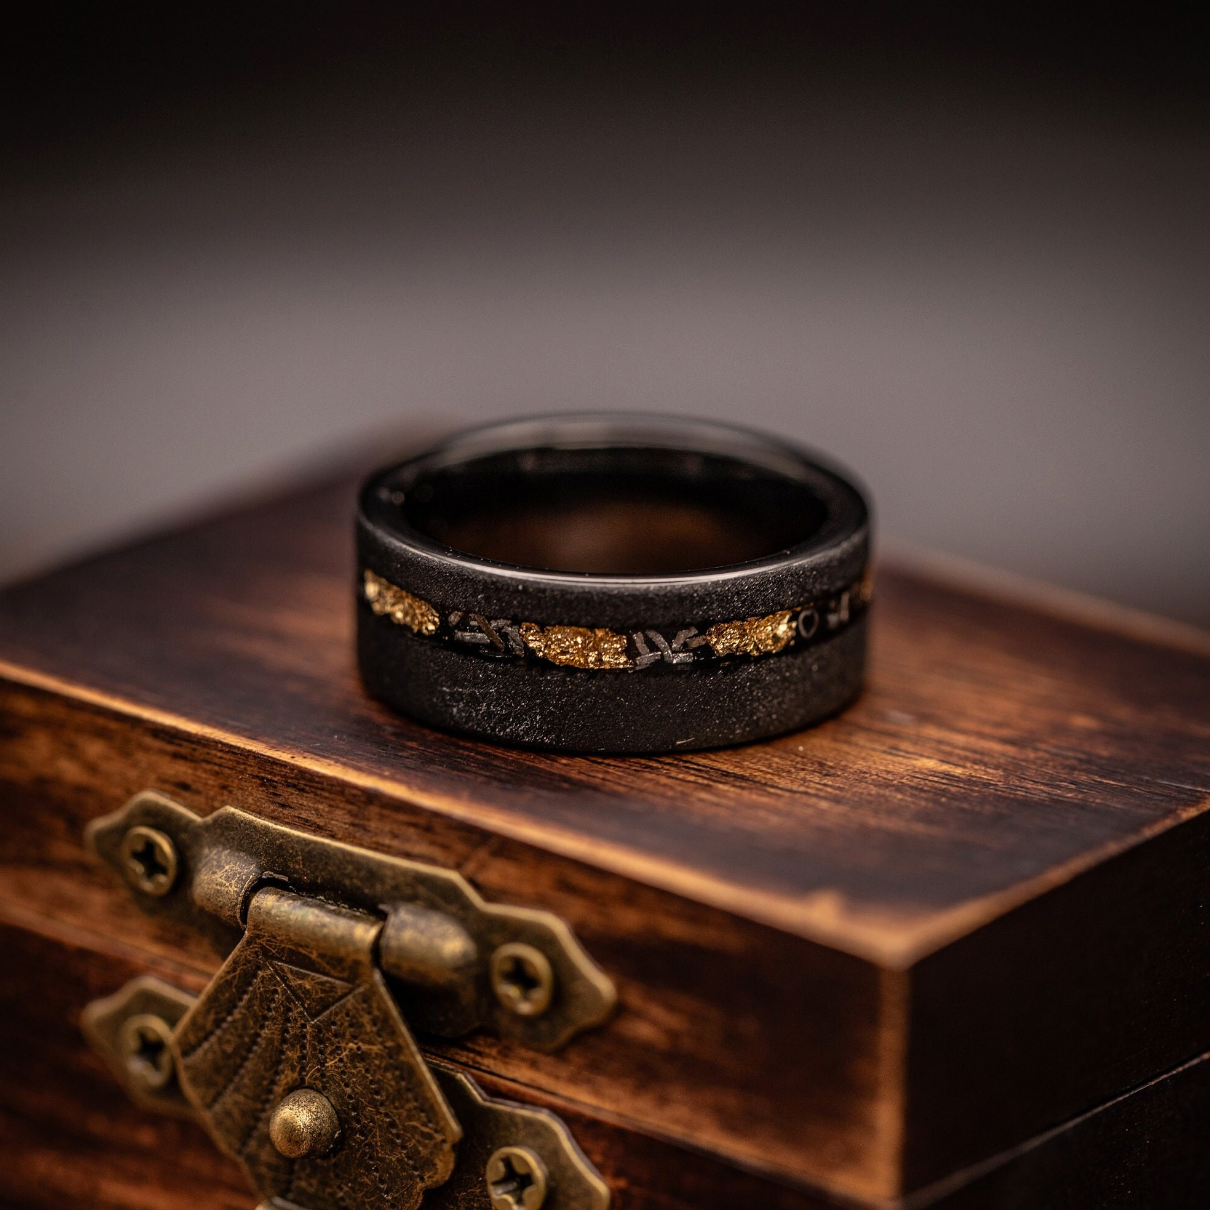 Men's wedding band showcasing a blend of black, gold, and meteorite elements for a distinctive look.